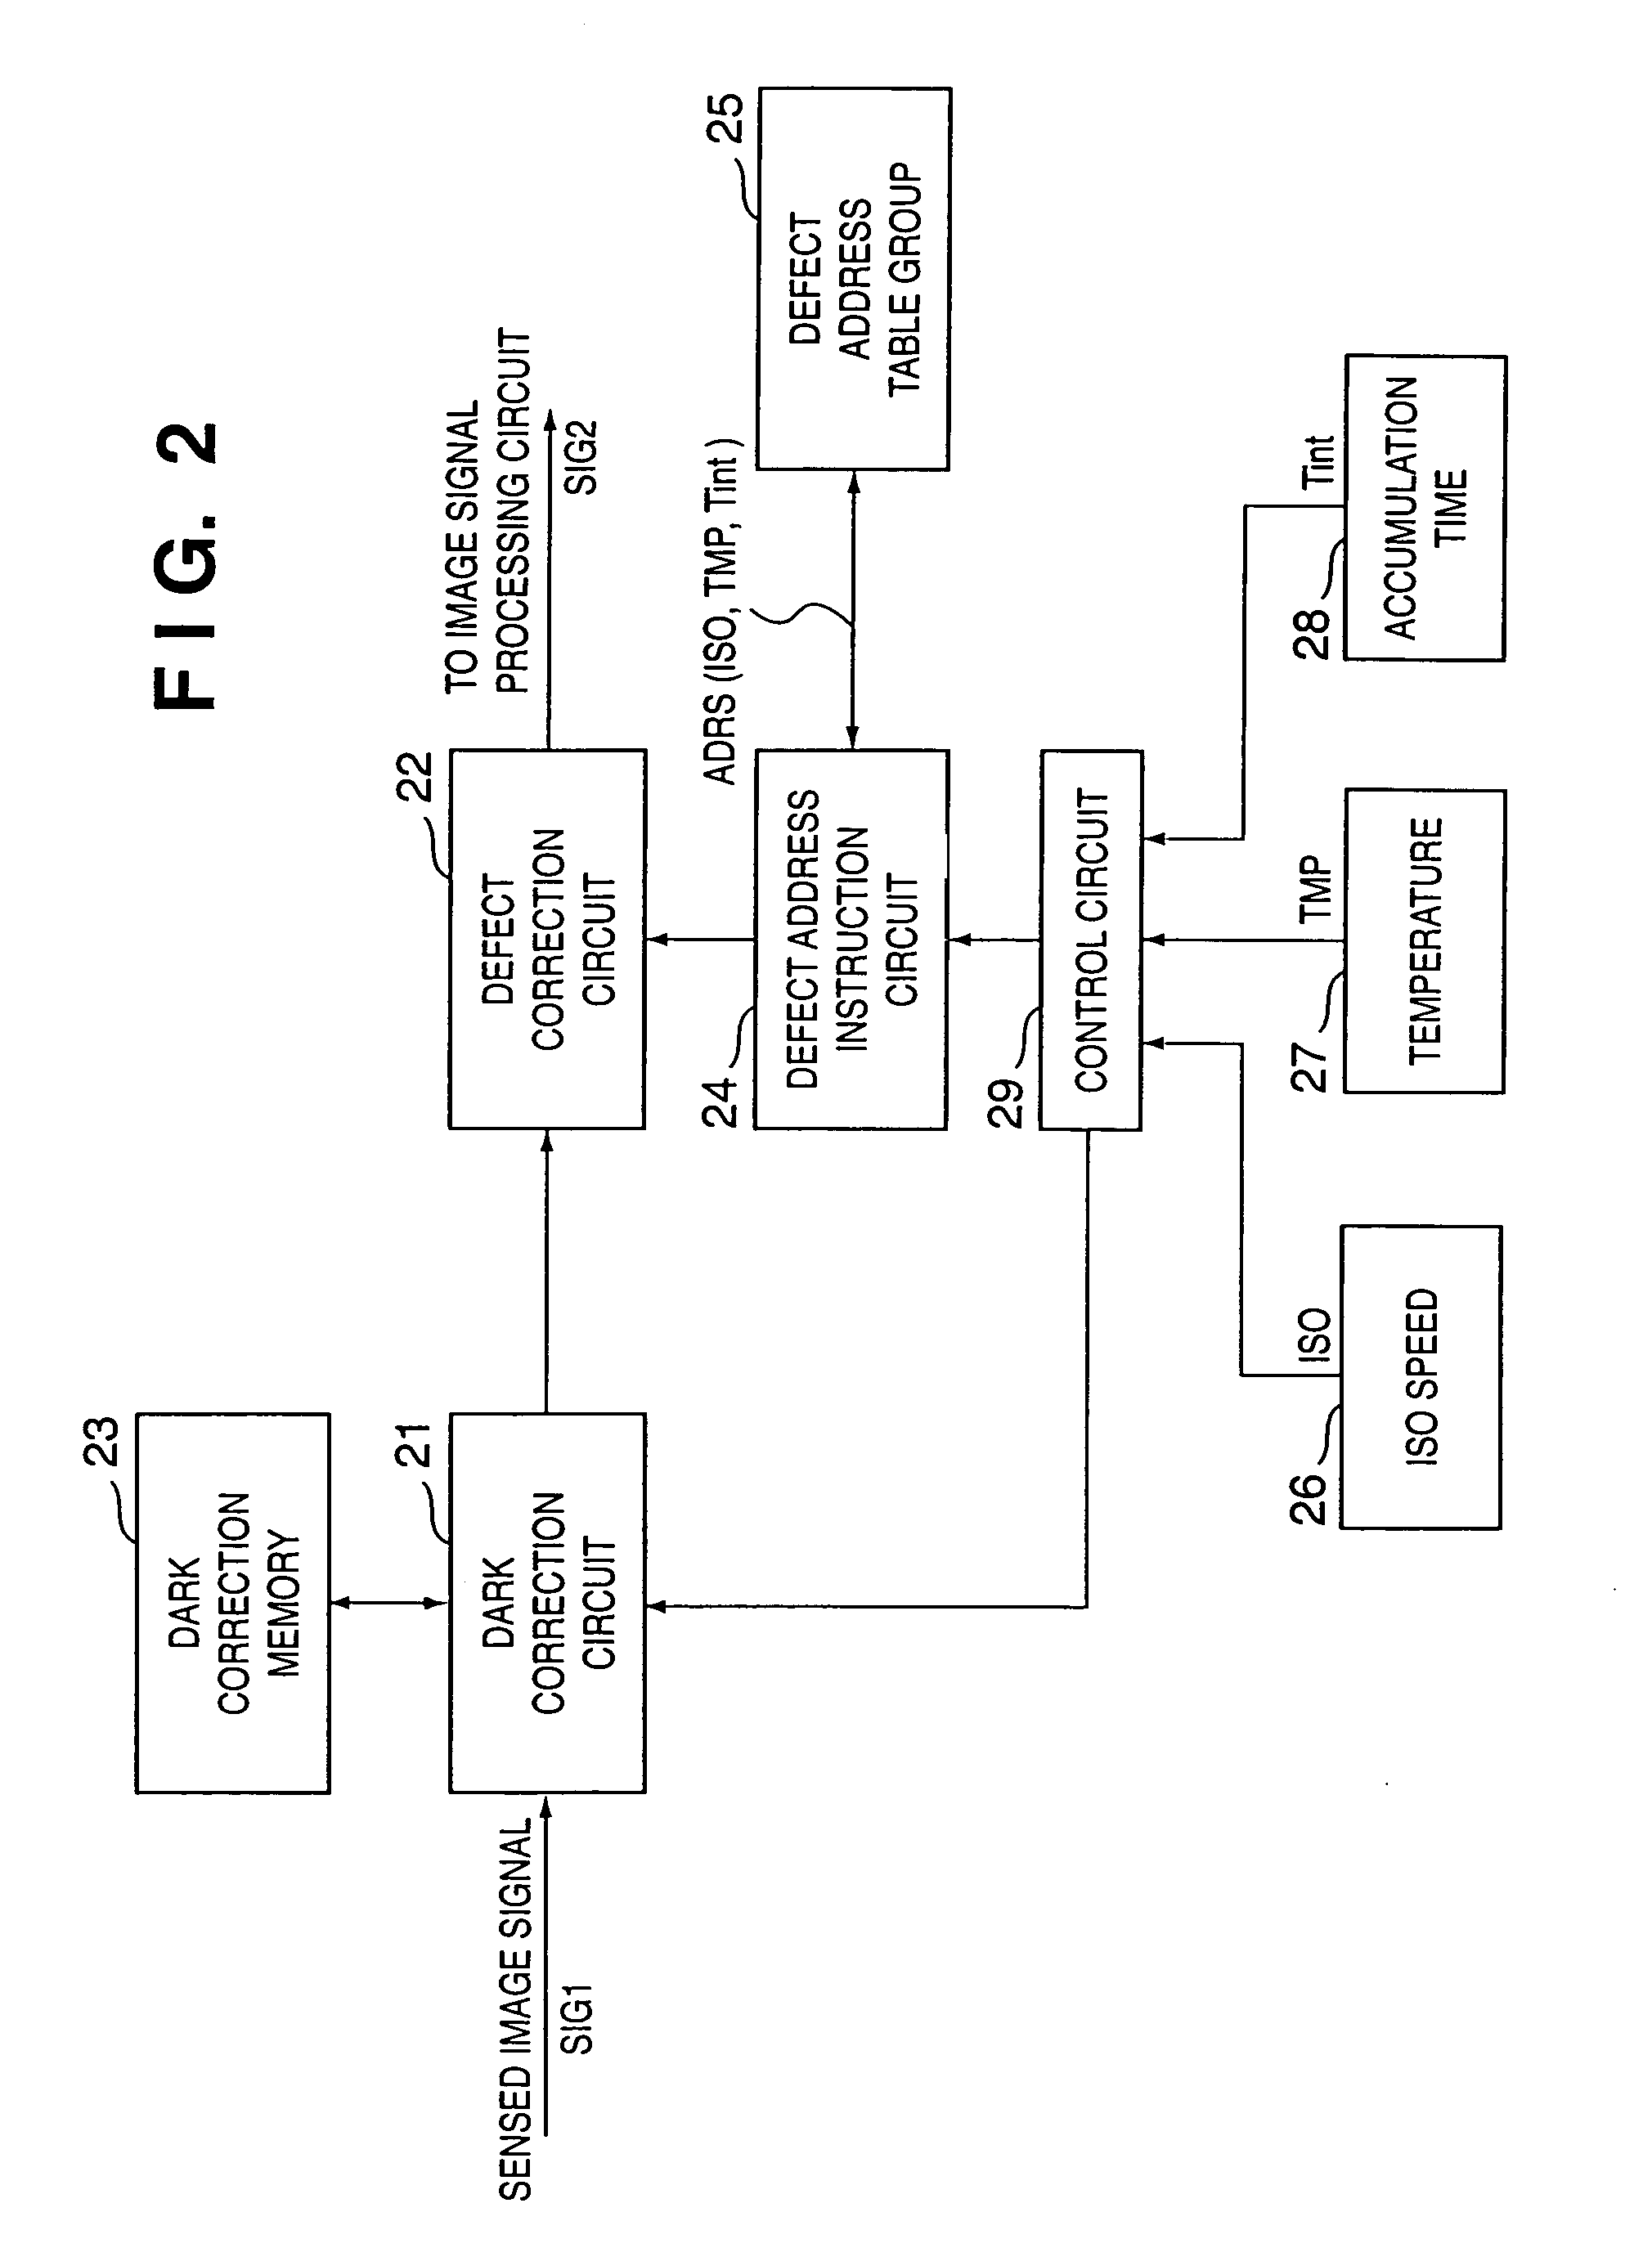 Image processing apparatus having an image correction circuit and its processing method